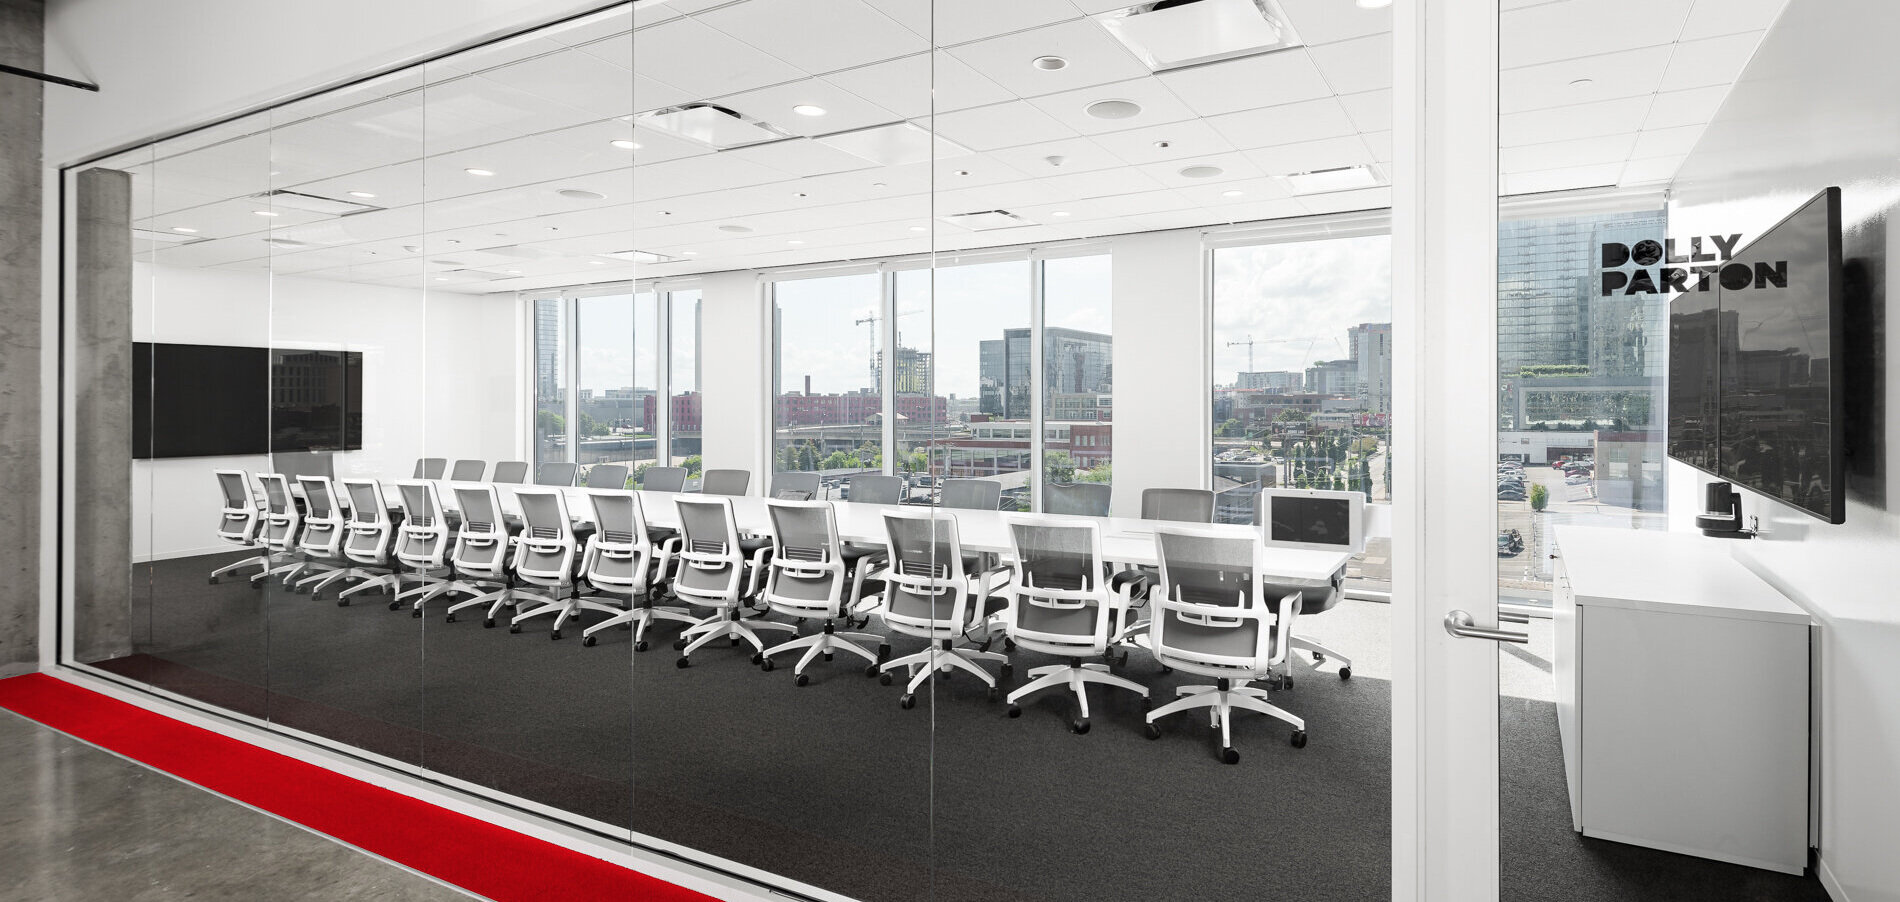 Nashville architectural photographer - large glass conference room